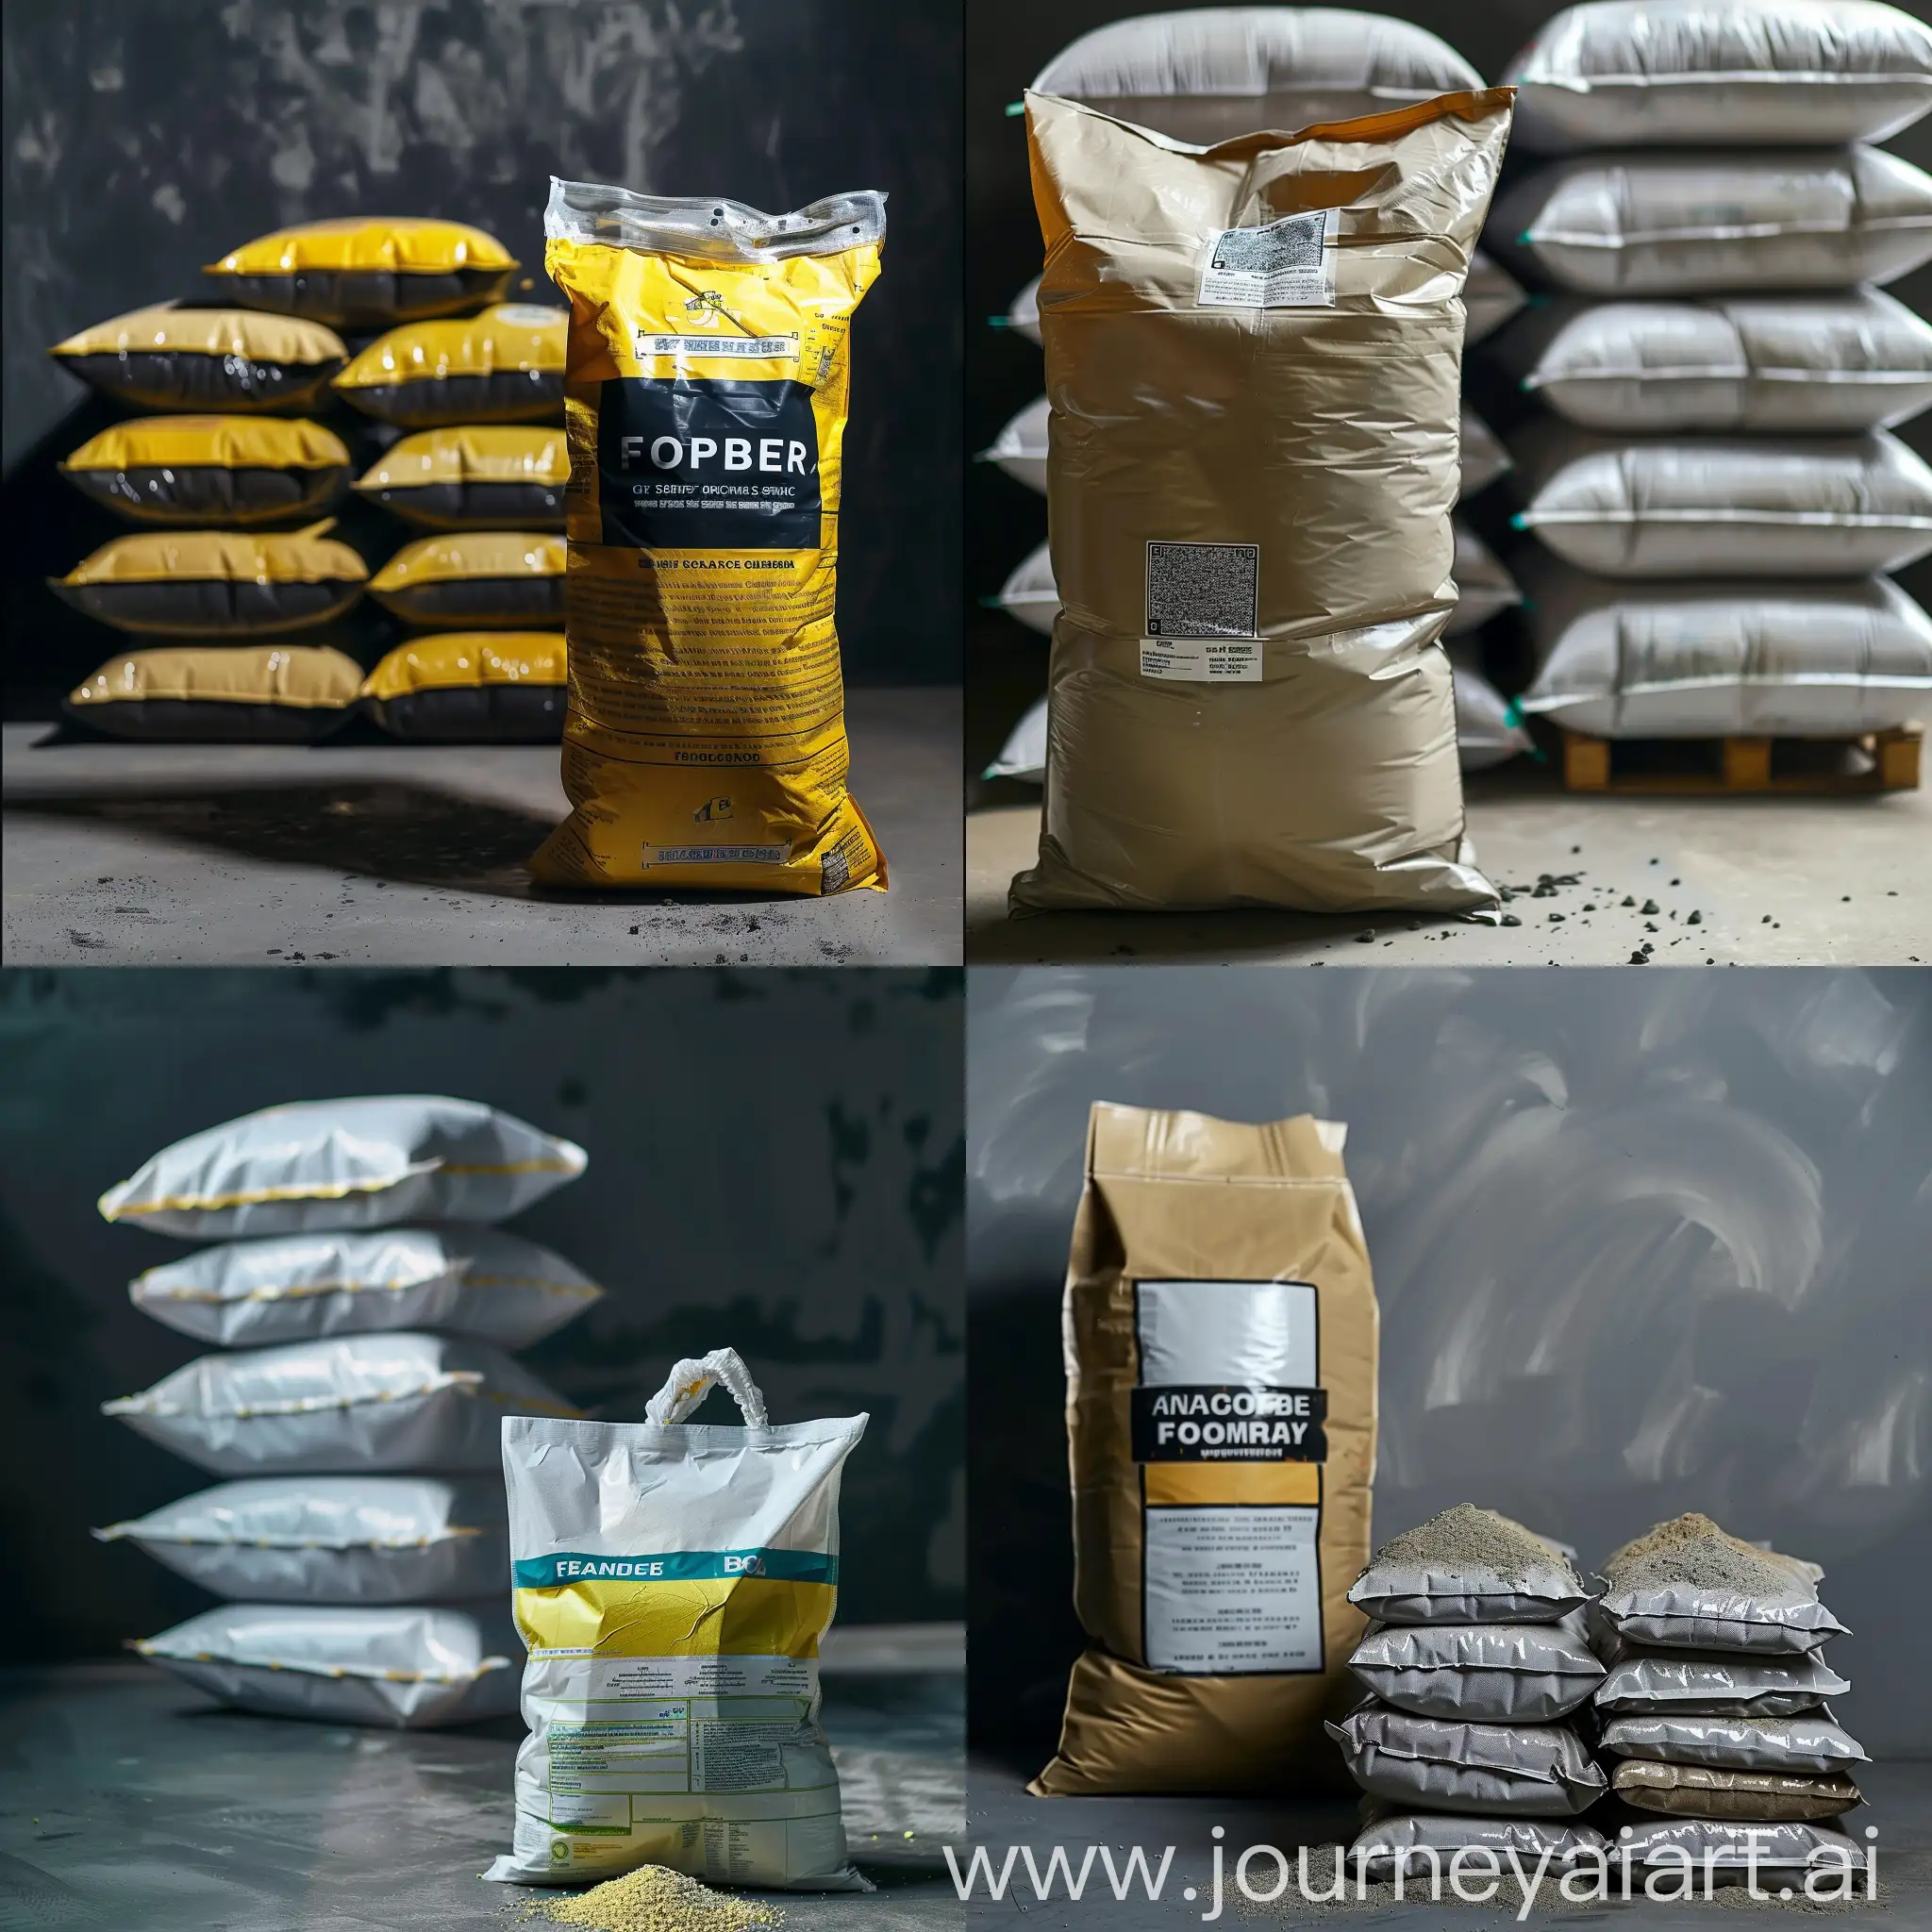 A bag of fertilizer in front of us against a stack of other similar bags stacked on top of each other, advertising poster without text